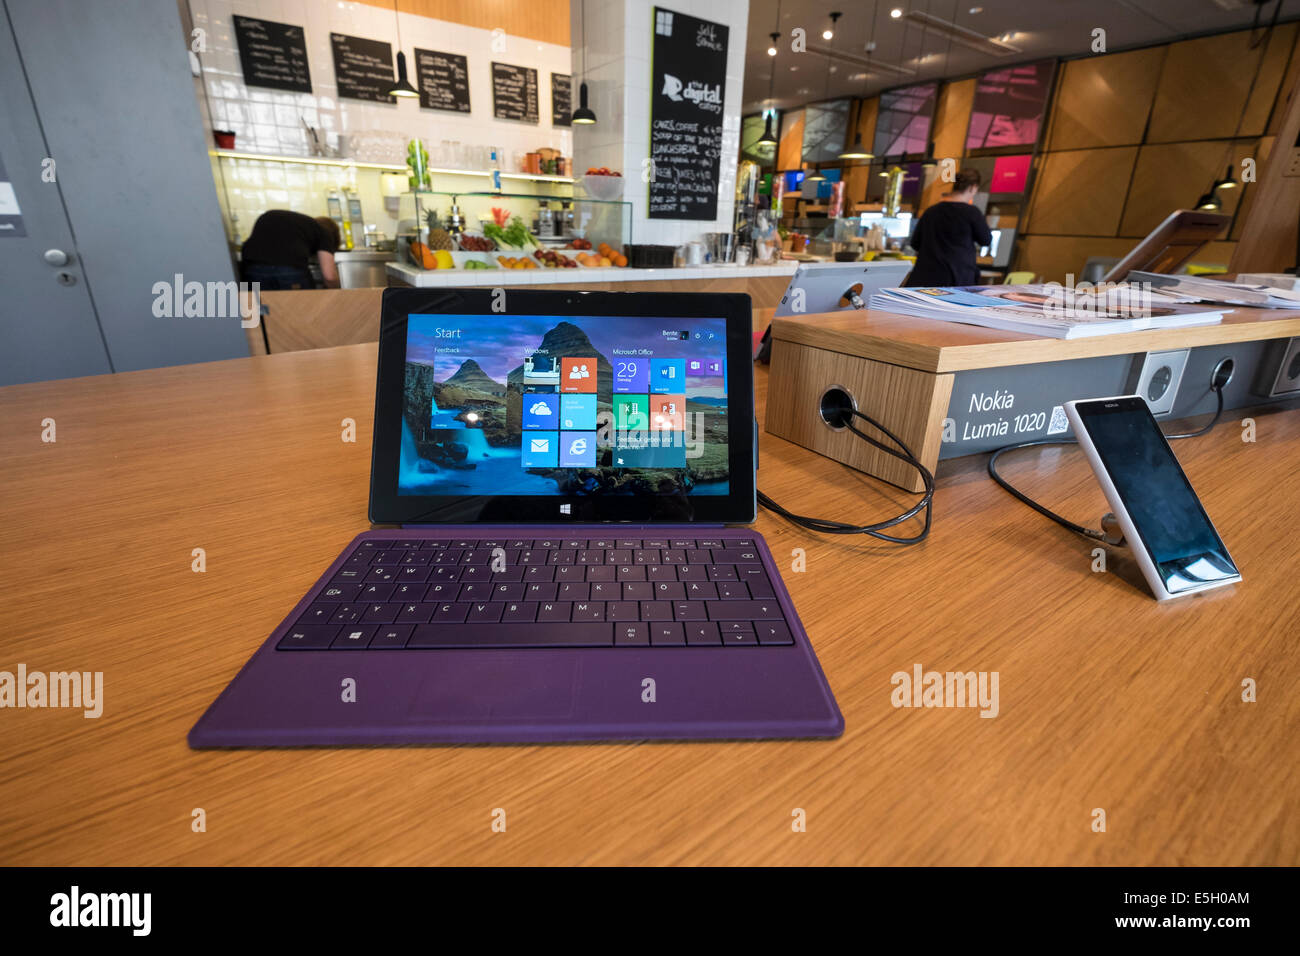 Touchscreen tablet computers and smart phones  at new Microsoft Digital Eatery cafe on Unter den Linden in Berlin Germany Stock Photo